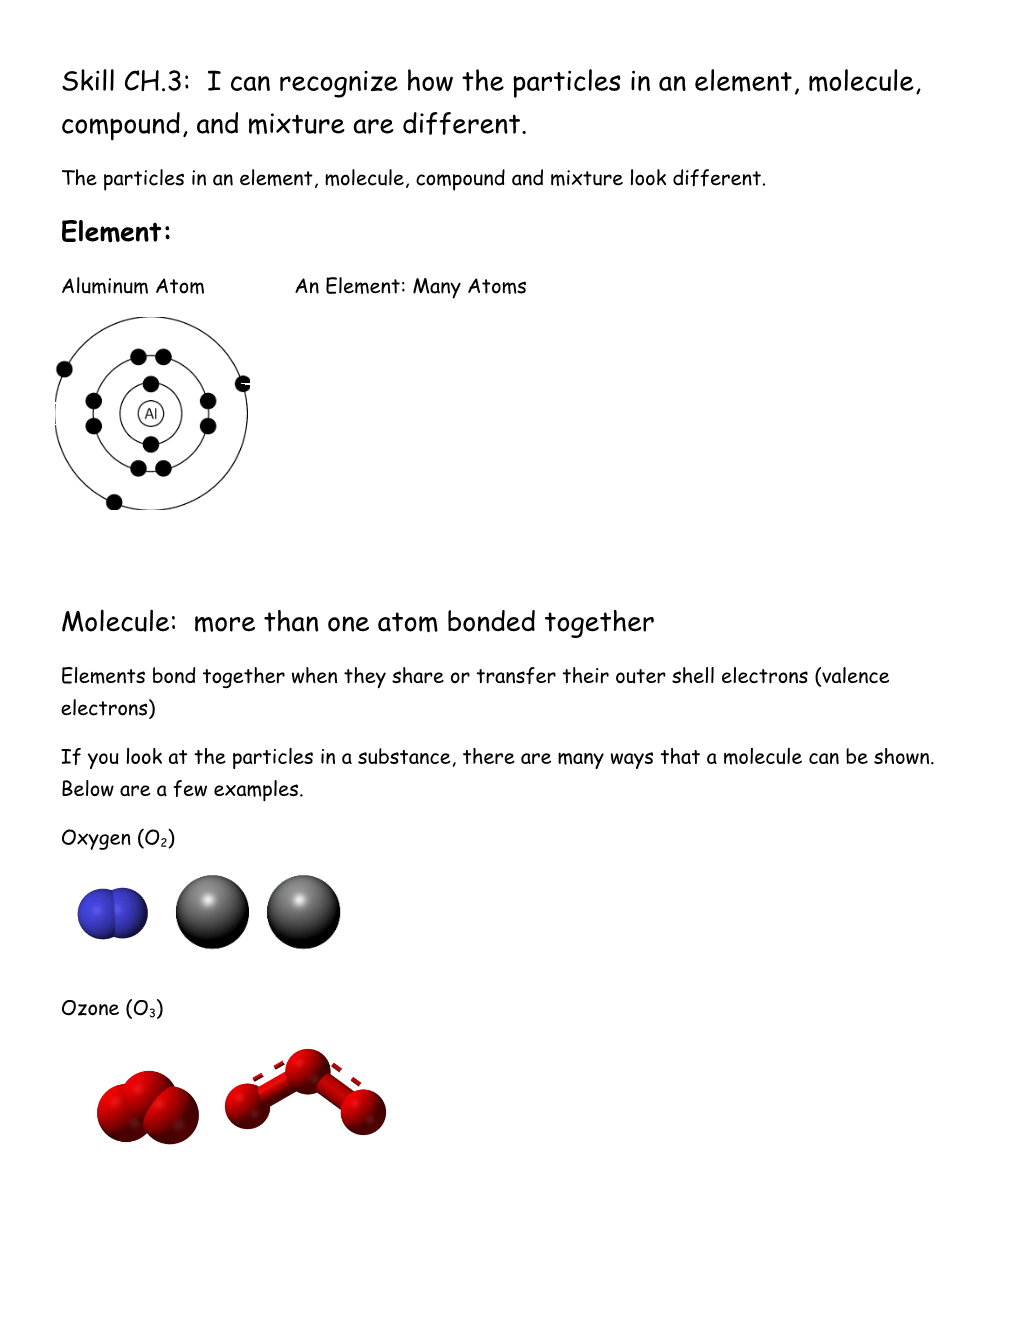 The Particles in an Element, Molecule, Compound and Mixture Look Different